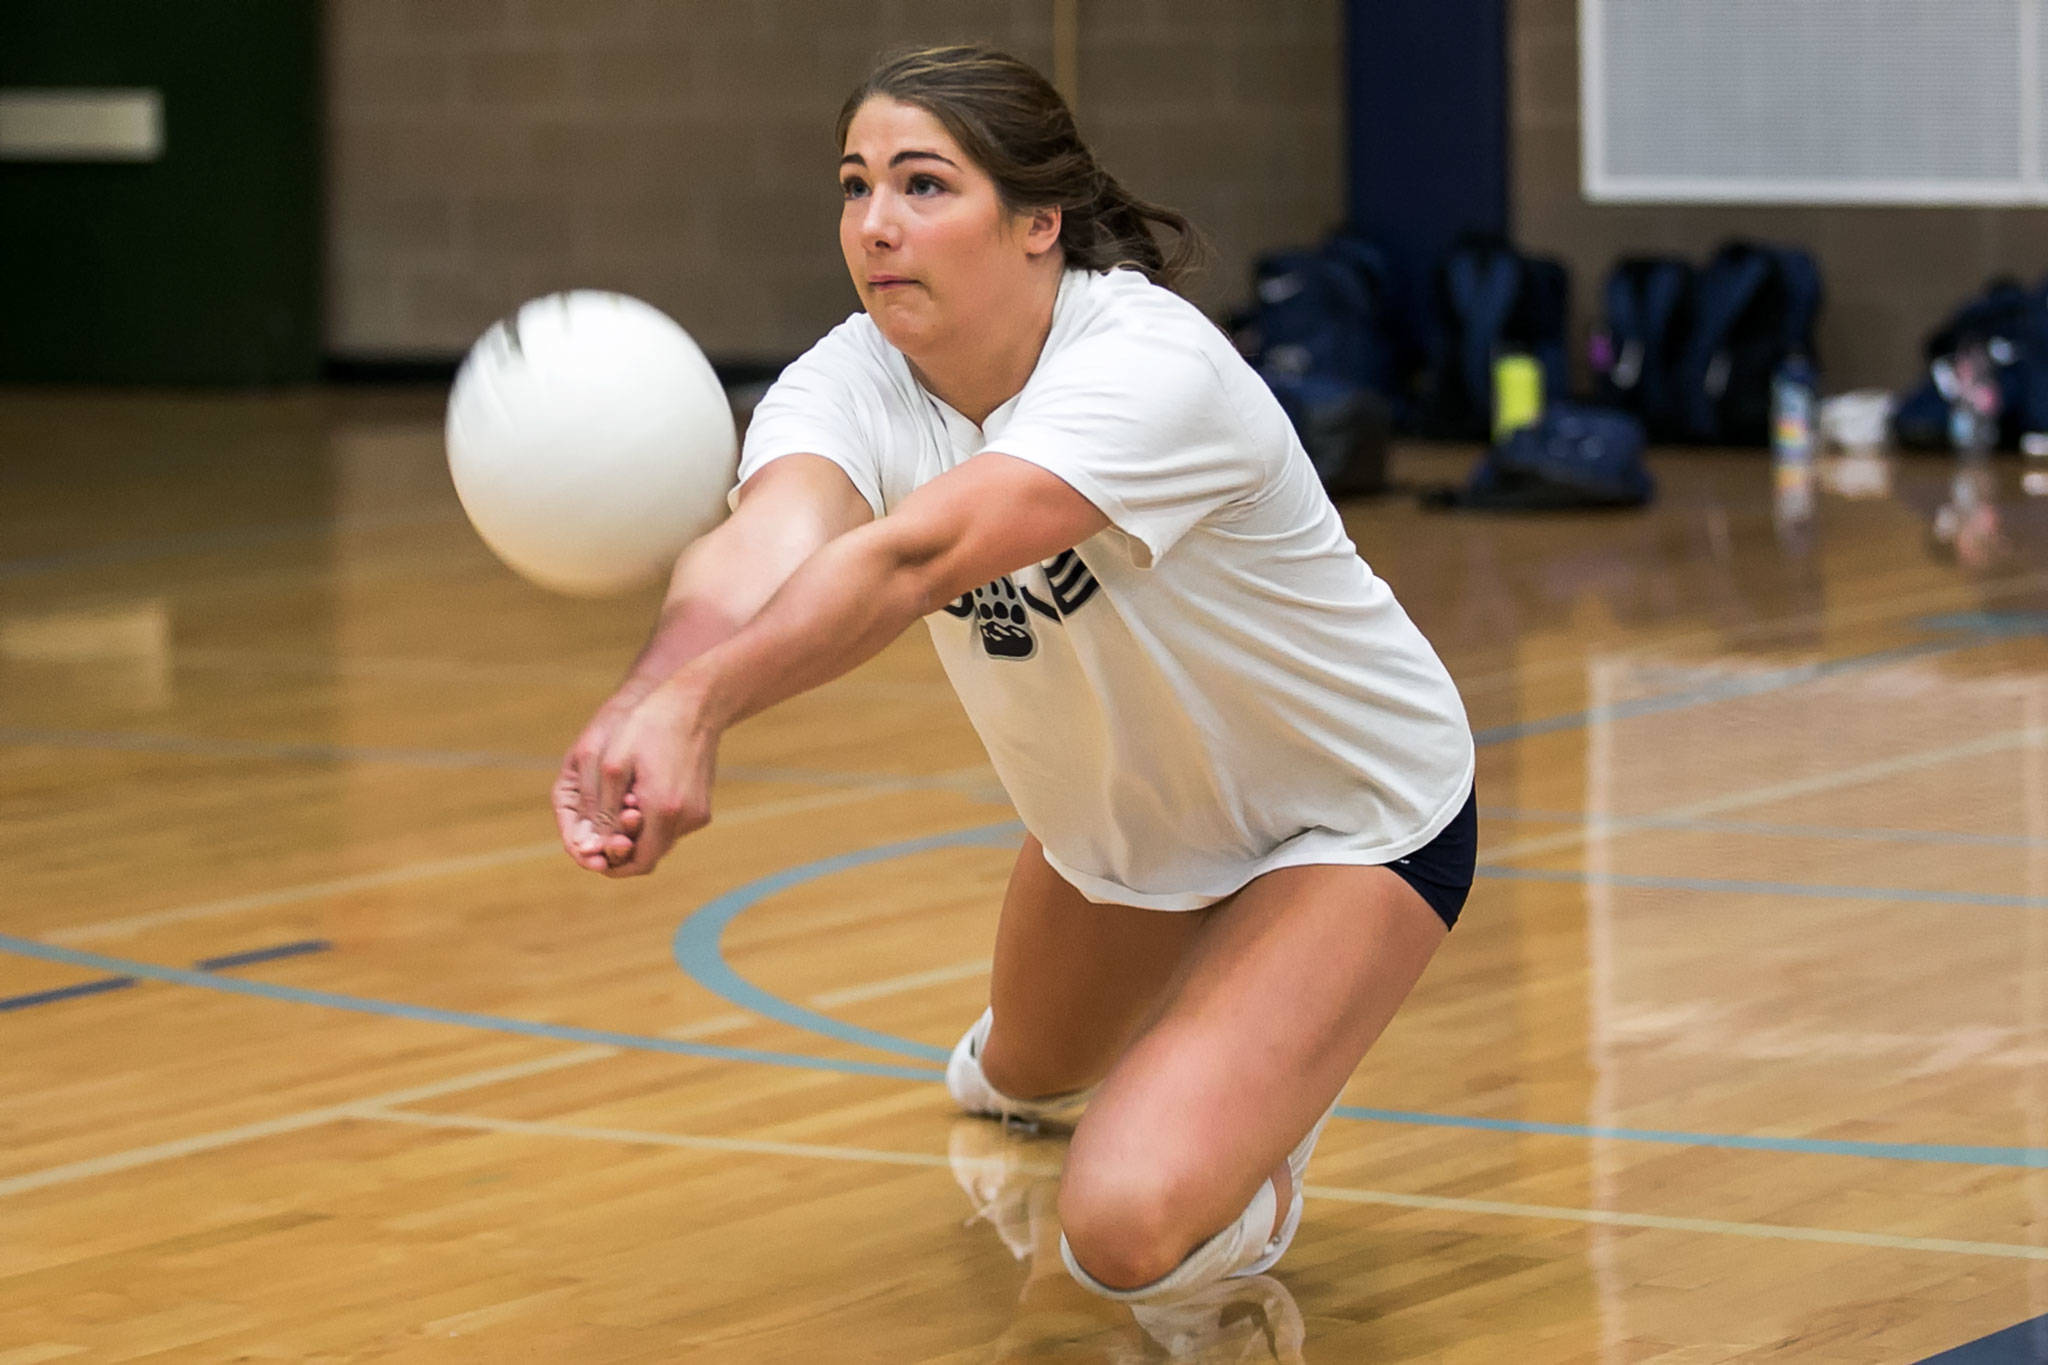 Sydney Petersen takes part in a practice session at at Glacier Peak High School. Petersen, a senior middle blocker, will continue her volleyball career at the University of Nevada. (Kevin Clark / The Herald)